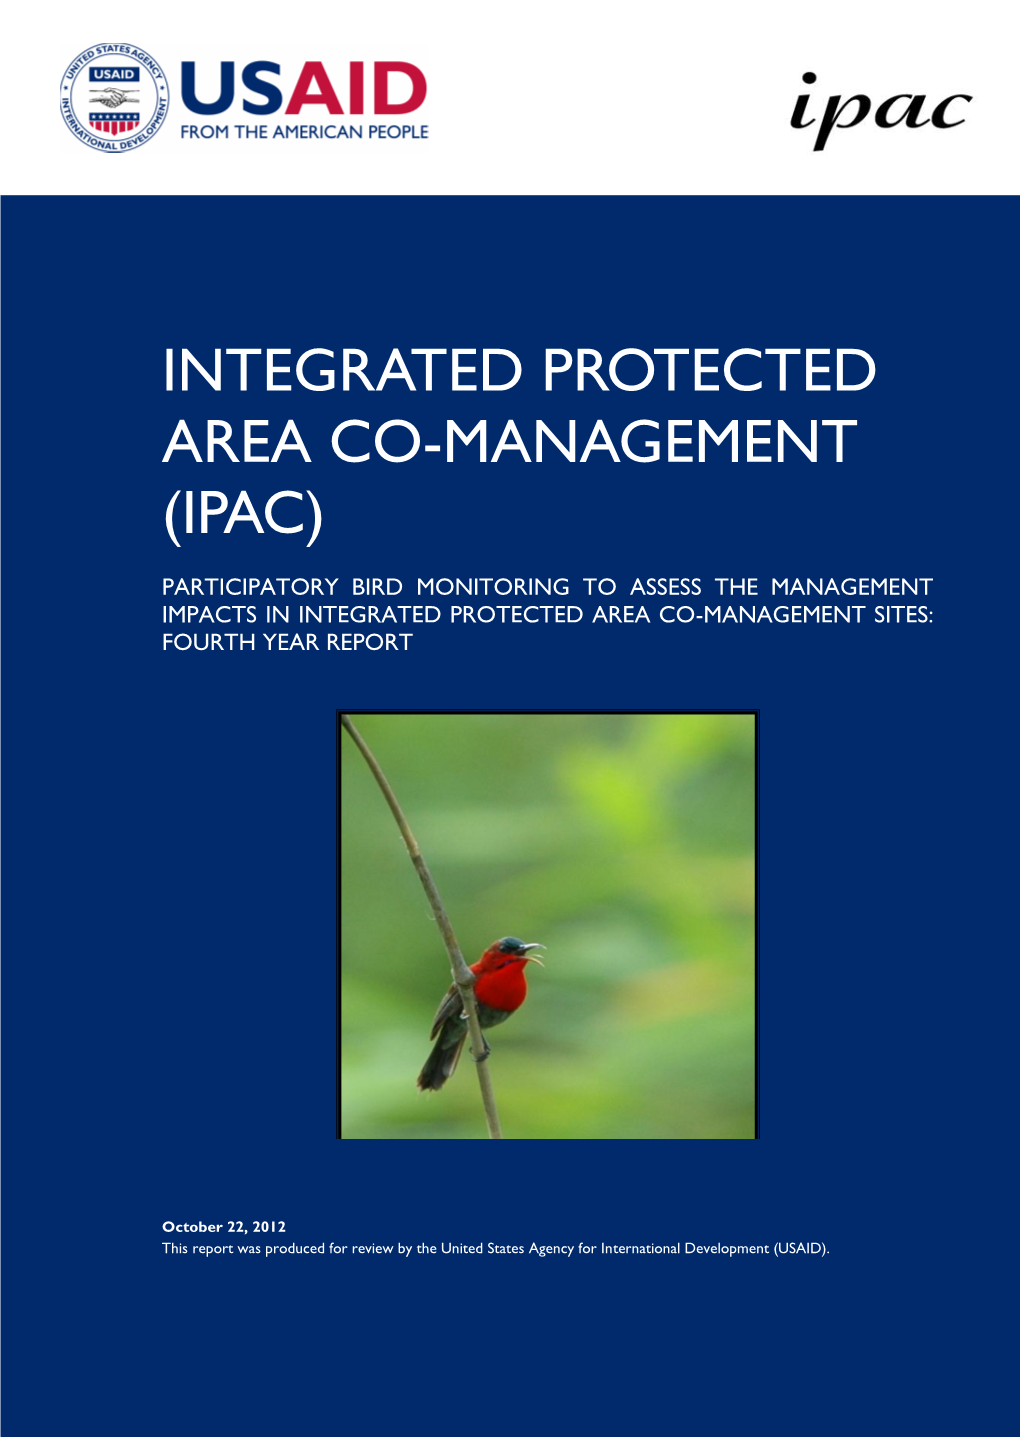 5-16 IPAC Indicator Forest Bird Monitoring Report 2012